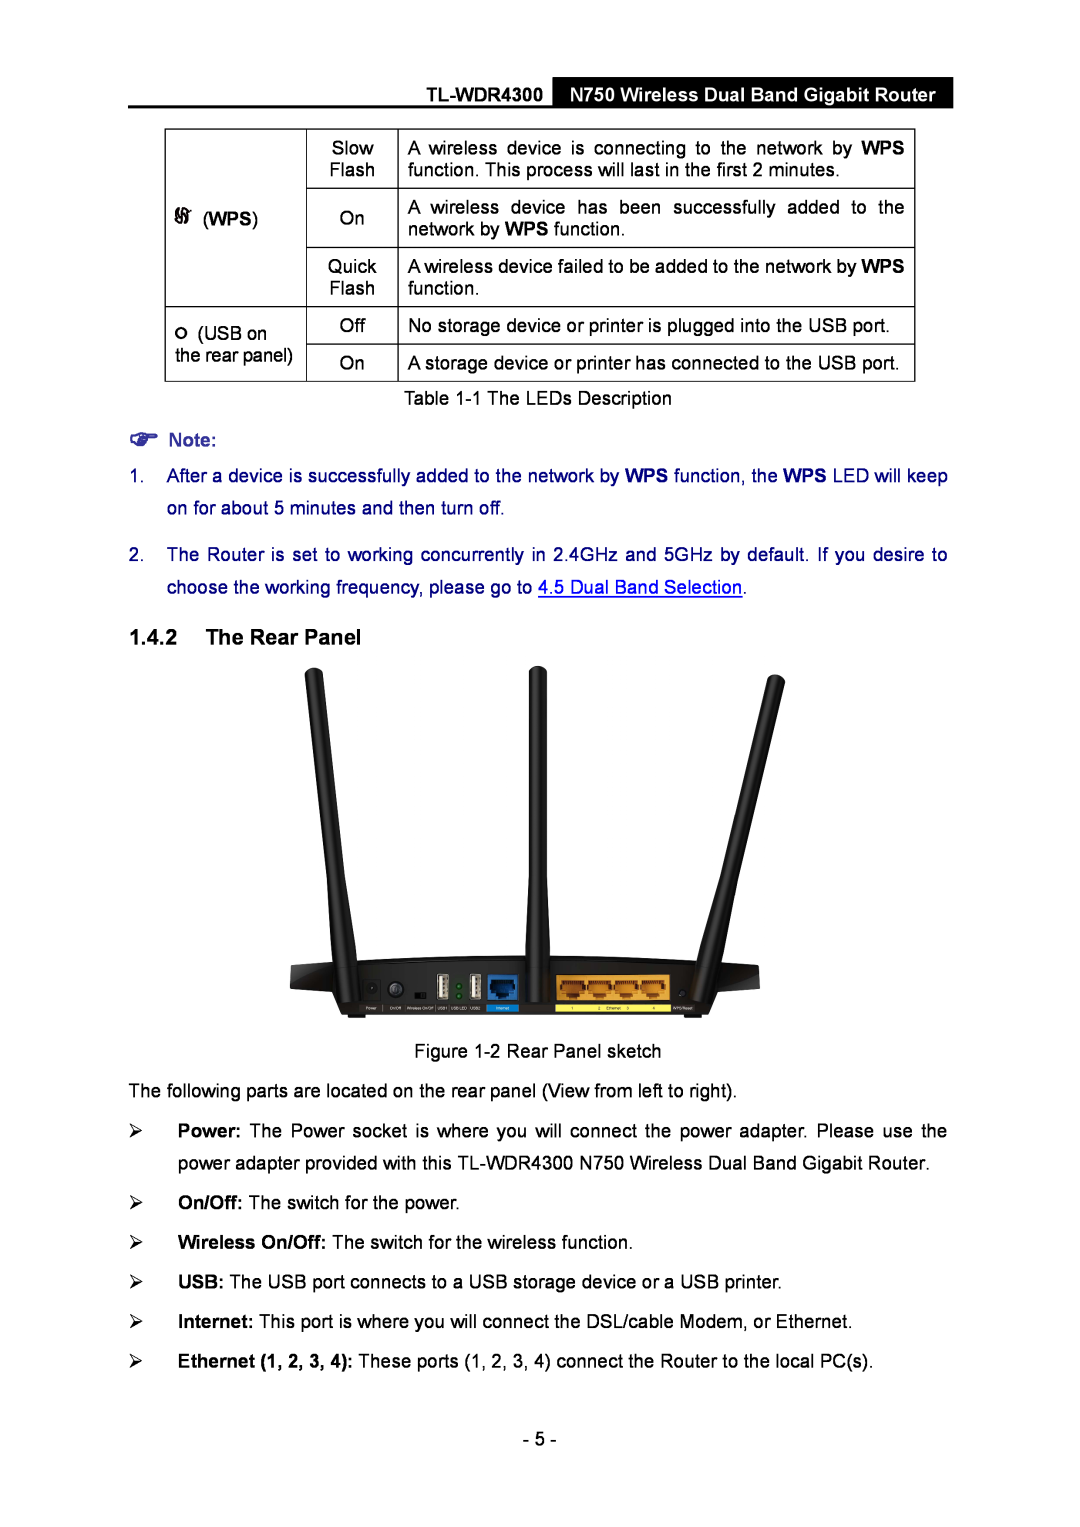 TP-Link TL-WDR4300 manual The Rear Panel, N750 Wireless Dual Band Gigabit Router,  Note 